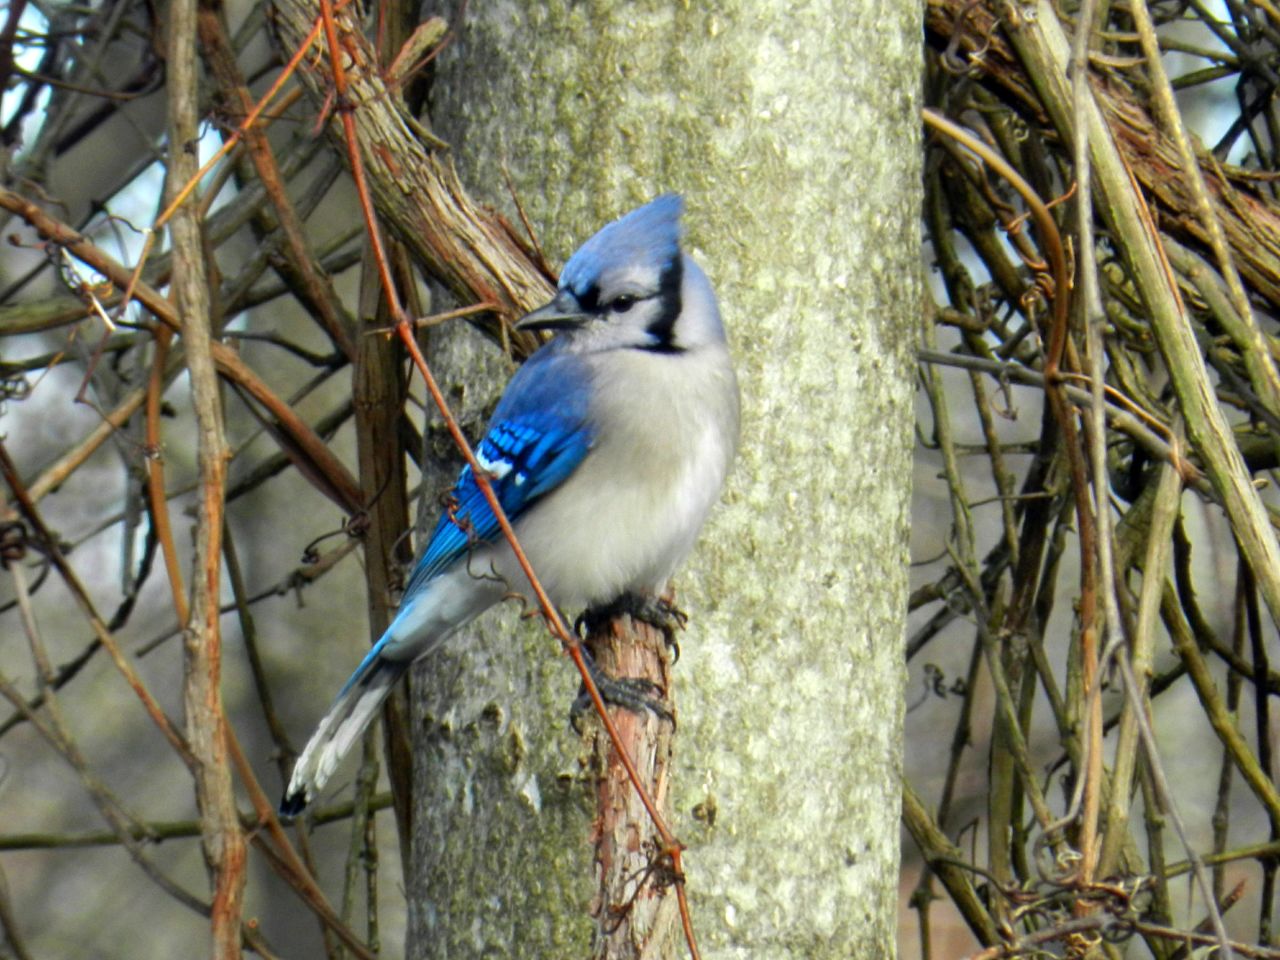 Blue Jays are a welcome sight in Maryland, adding a pop of color in wooded areas. "Observing the birds out my kitchen window is a peaceful way to start the day," said <a href="http://ireport.cnn.com/docs/DOC-905422">Janie Lambert. </a>